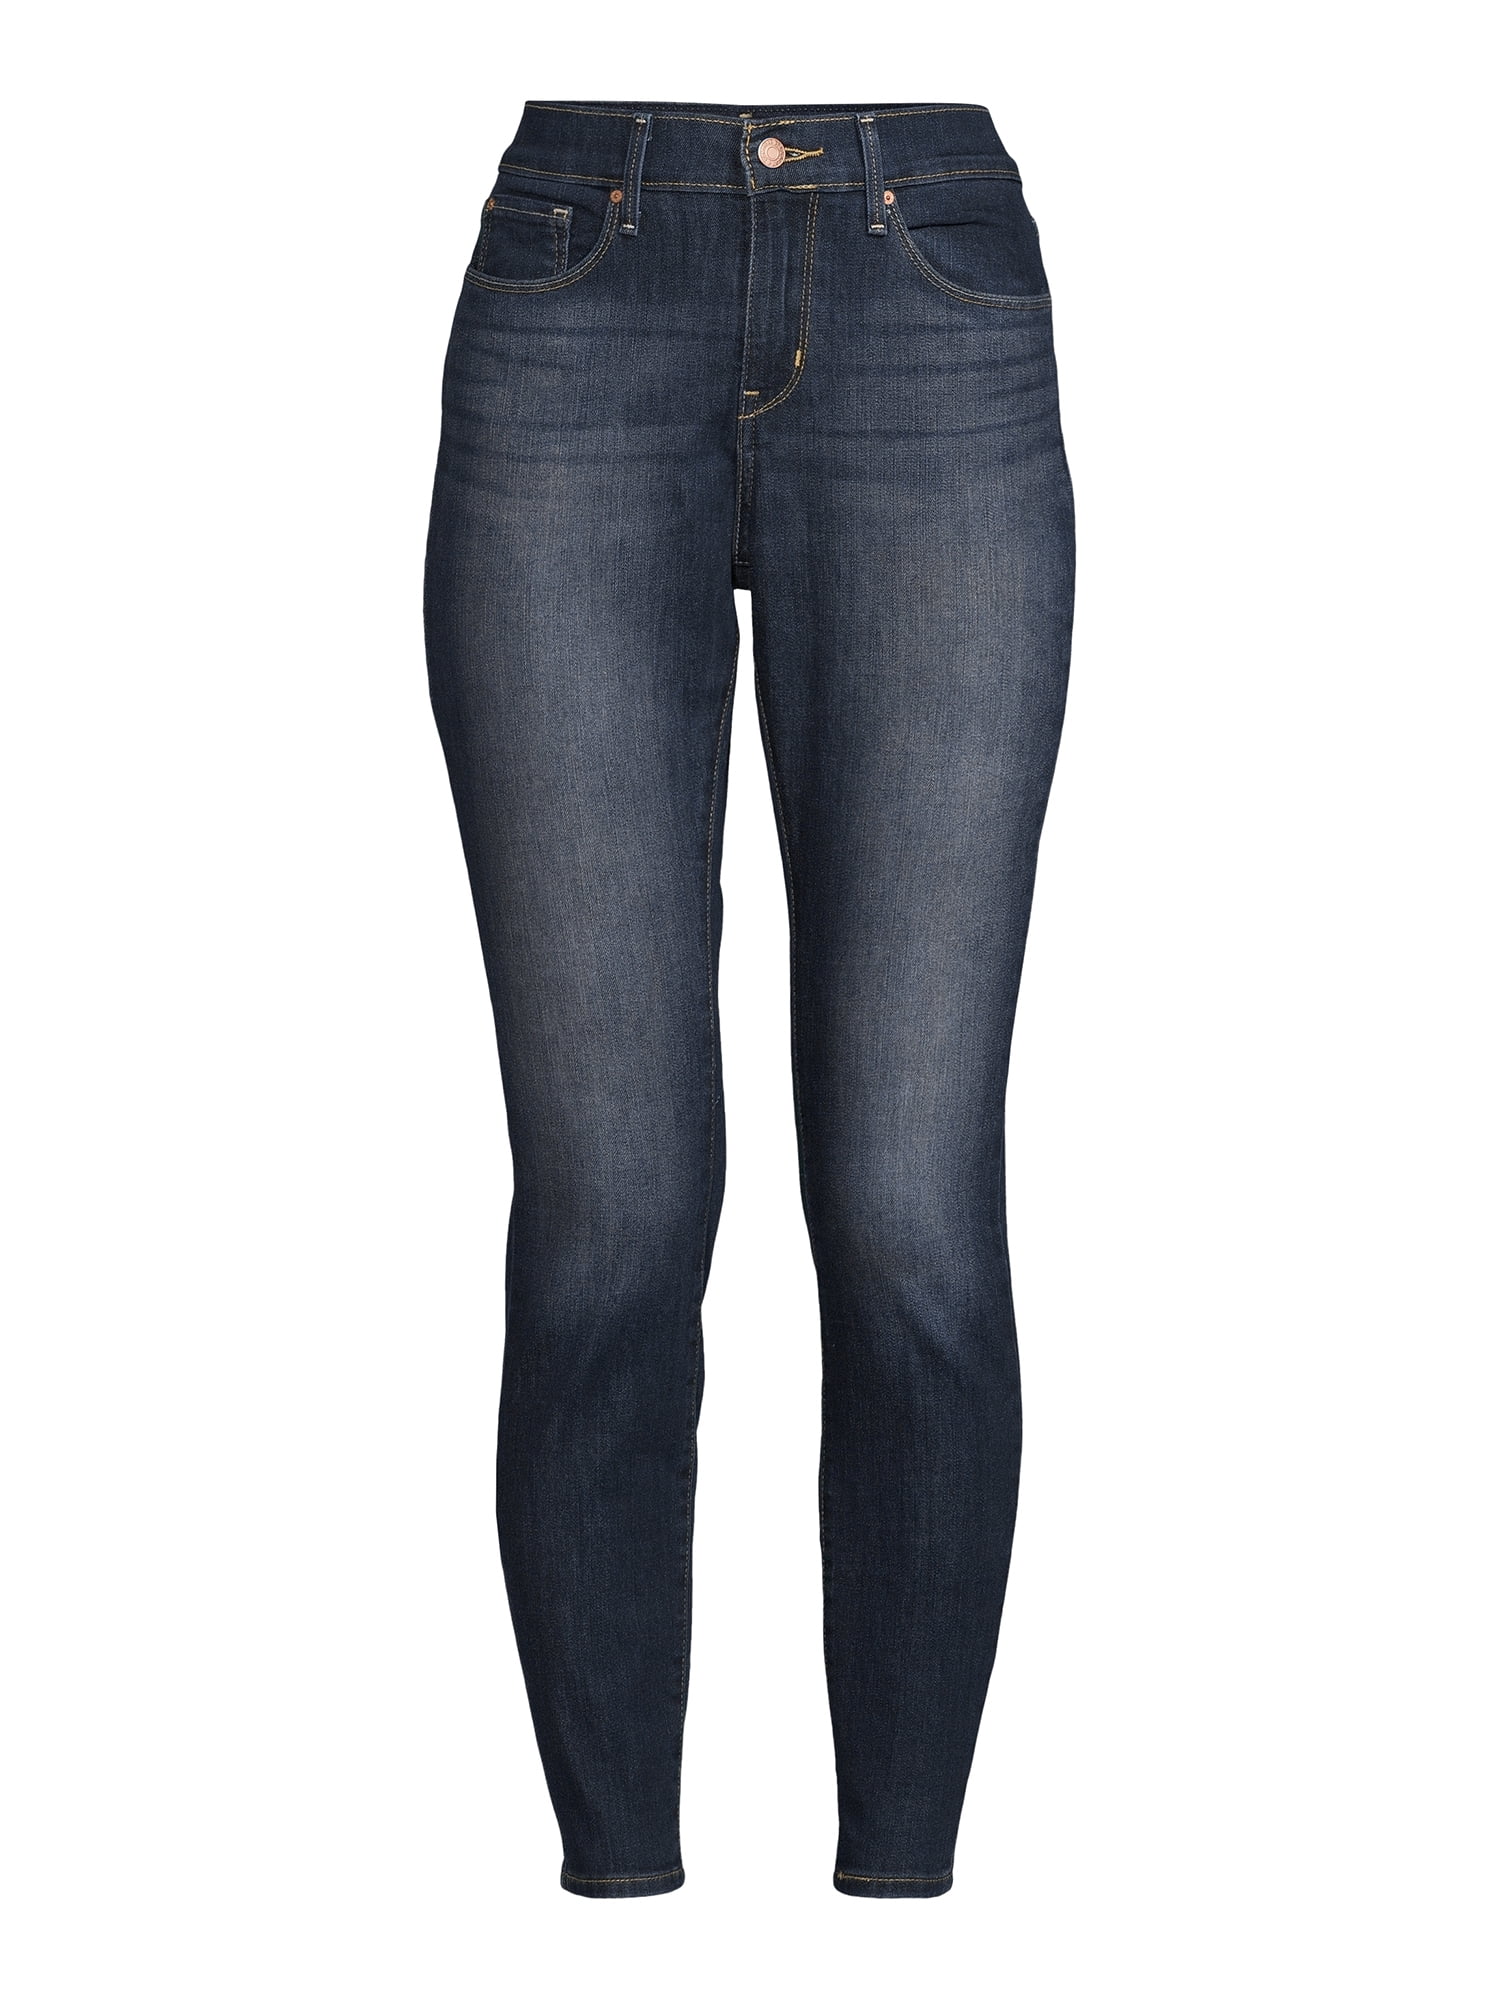 Signature by Levi Strauss & Co. Women's Curvy Skinny Jeans 